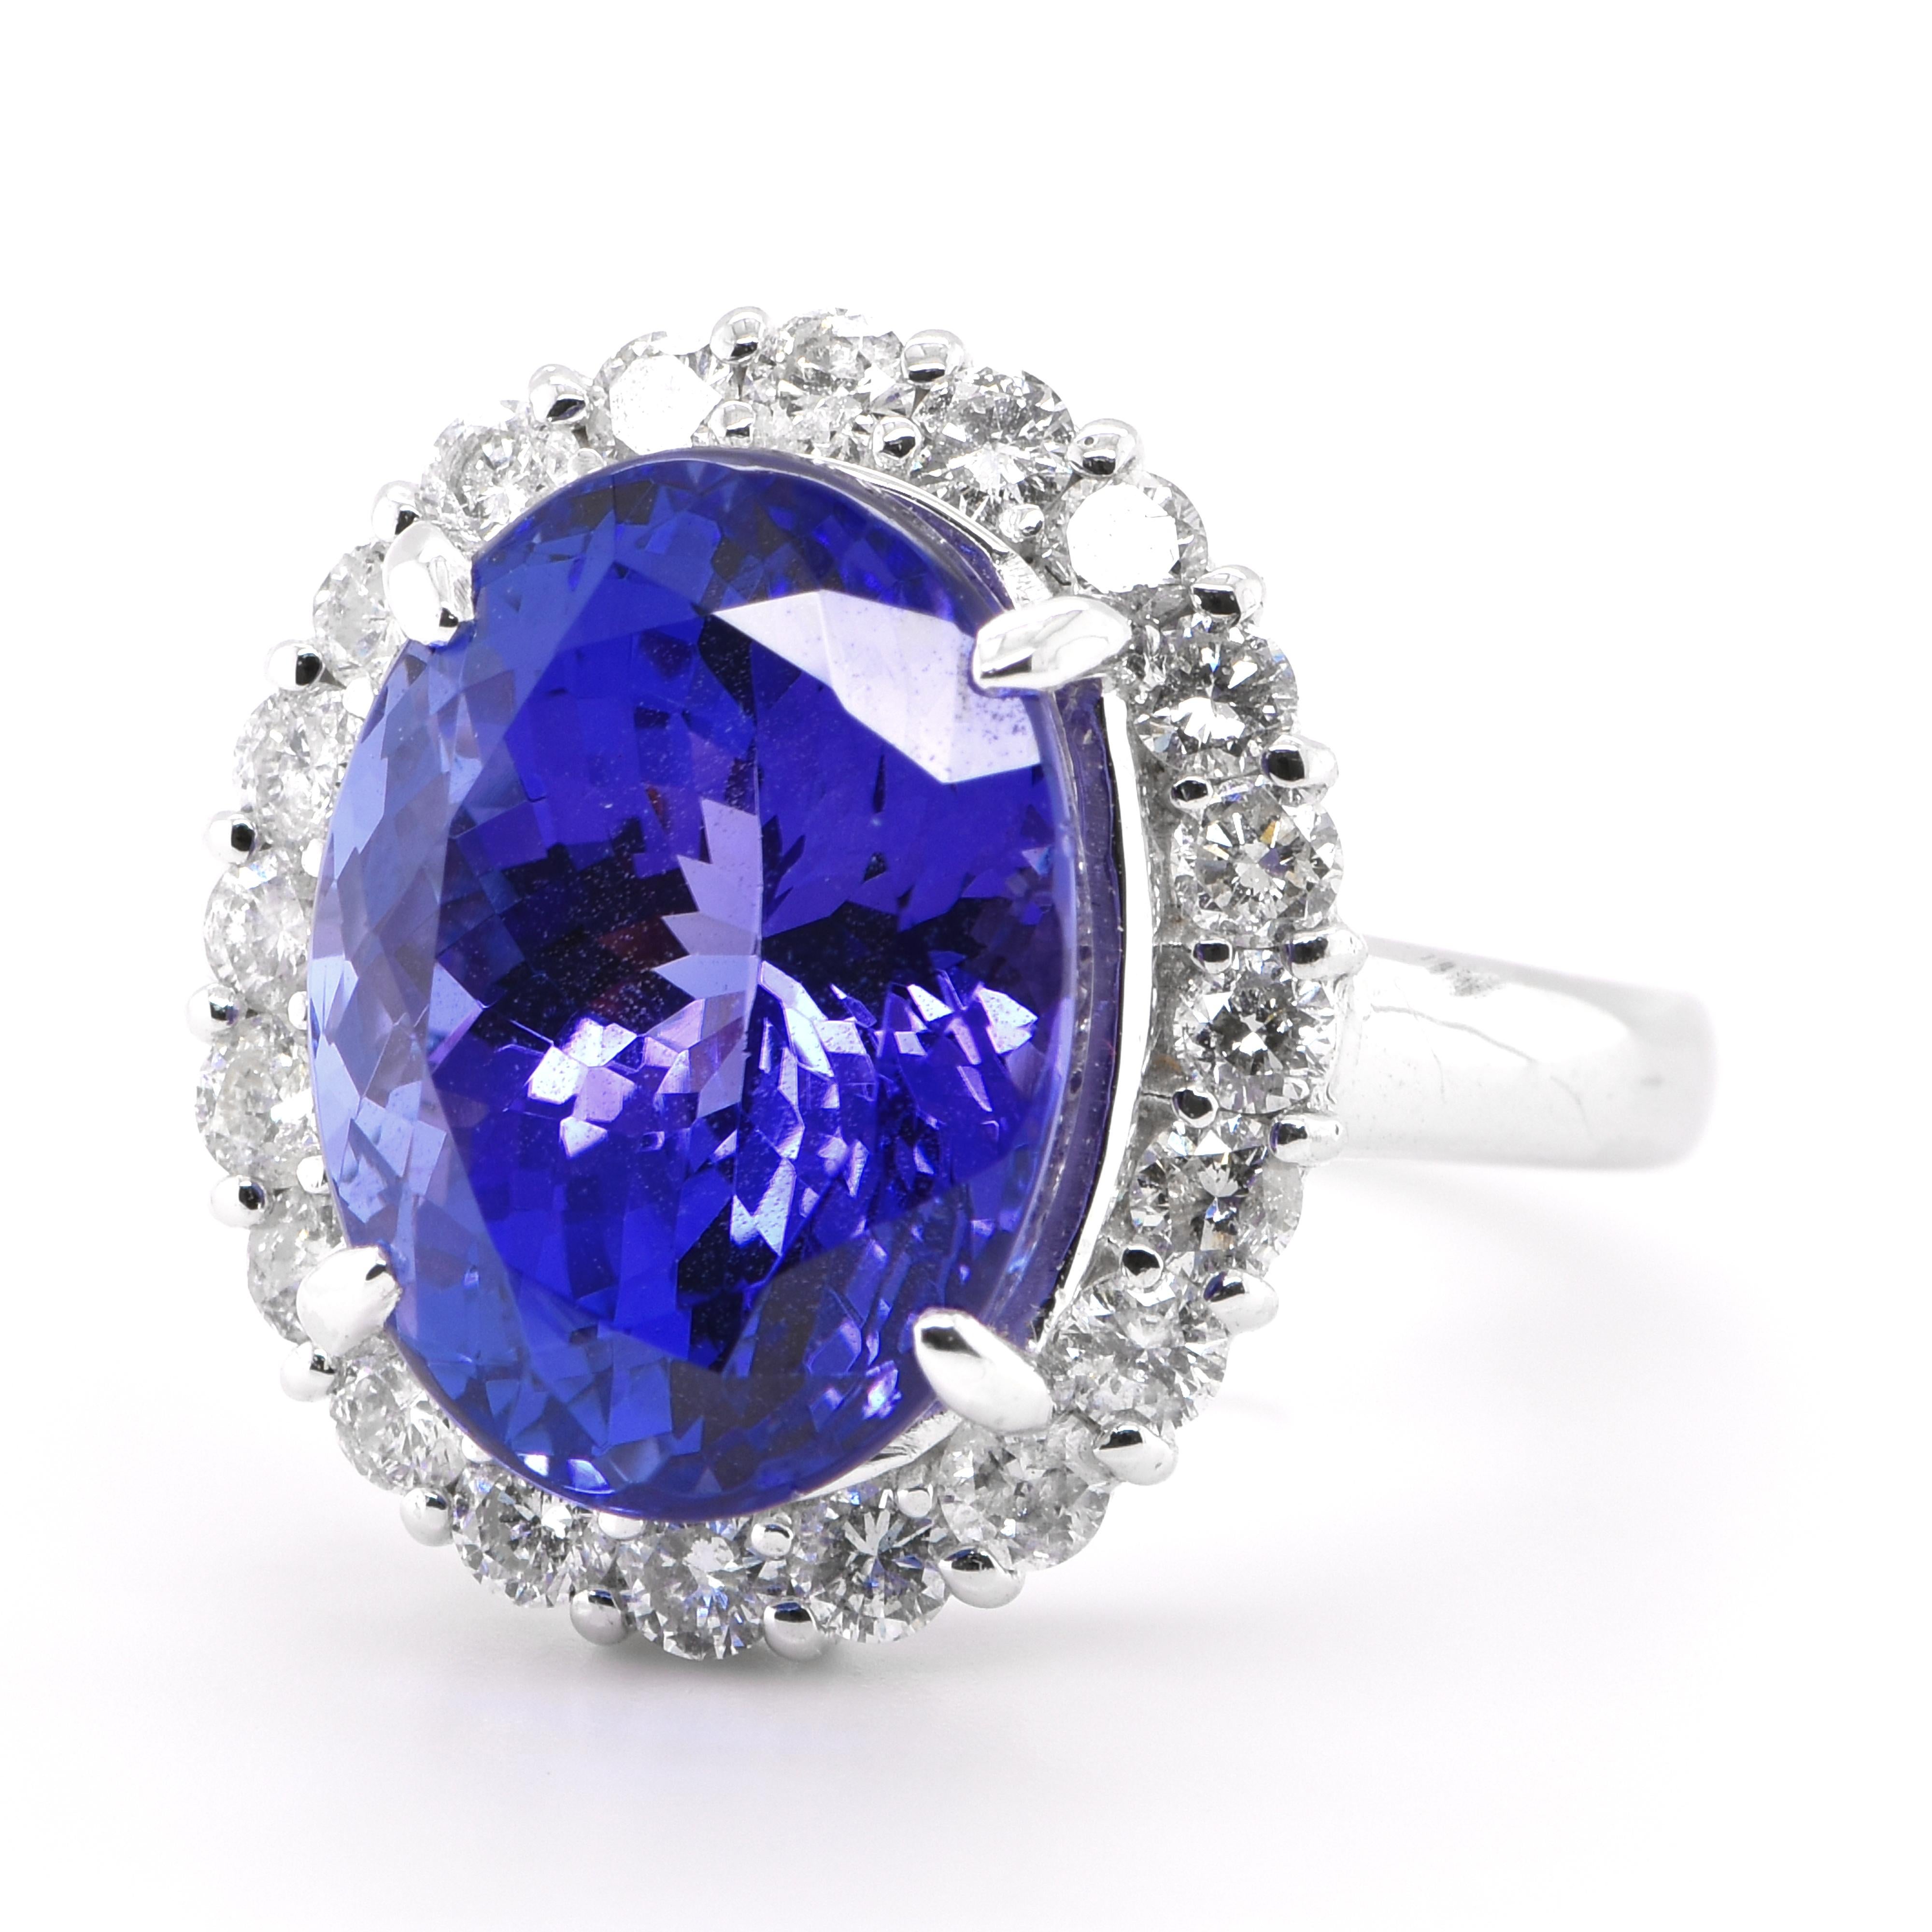 A beautiful Cocktail Ring featuring a 9.19 Carat Natural Tanzanite and 0.84 Carats of Diamond Accents set in Platinum. Tanzanite's name was given by Tiffany and Co after its only known source: Tanzania. Tanzanite displays beautiful pleochroic colors